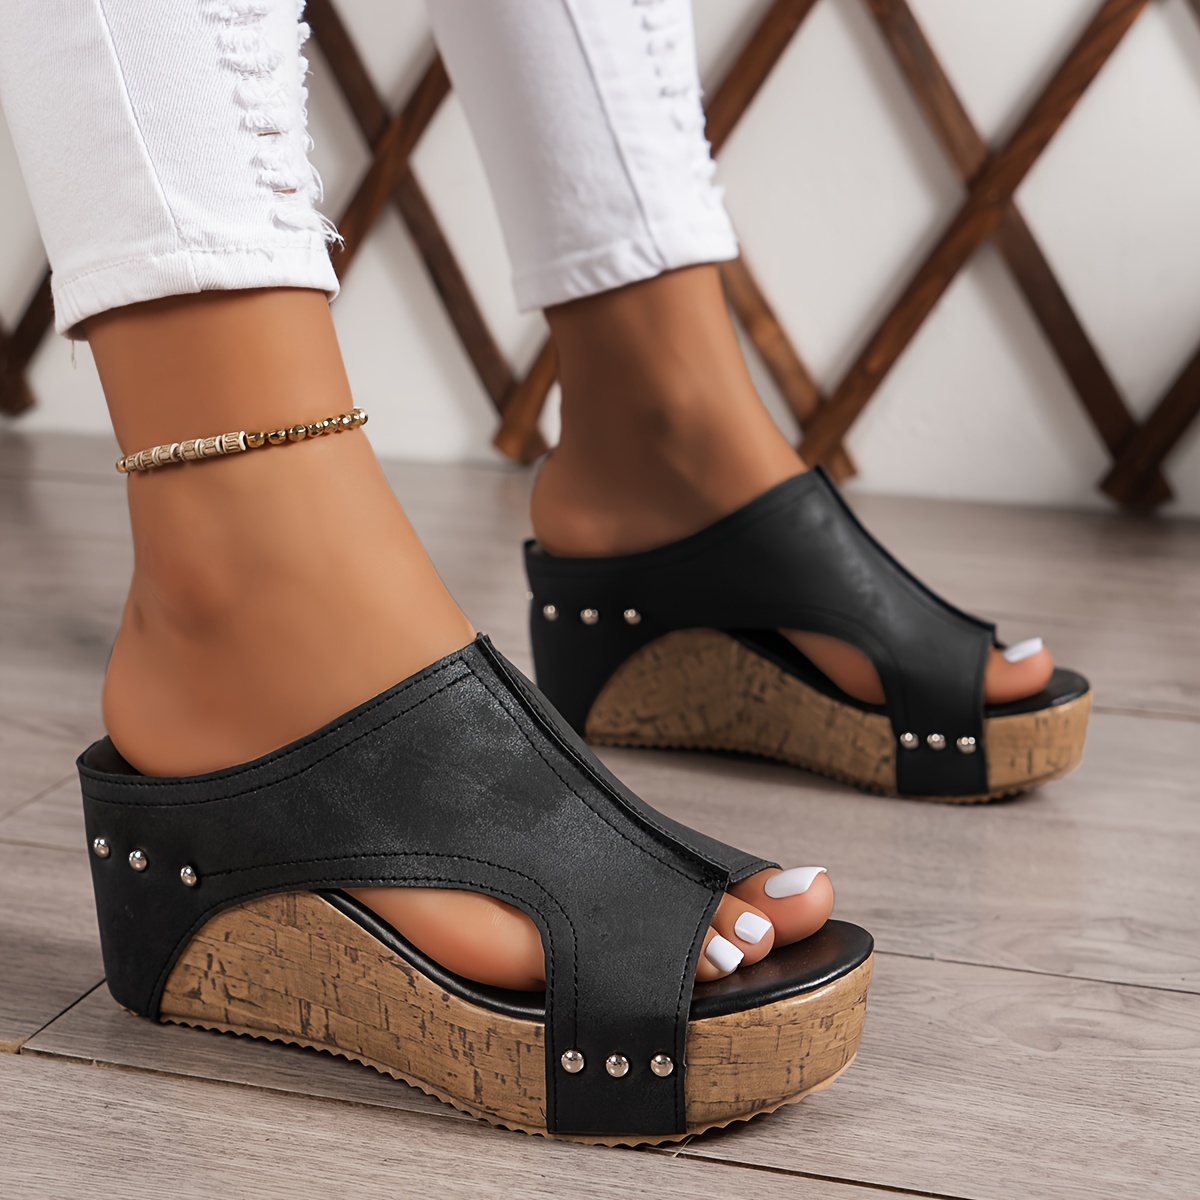 

Chic Women's Wedge Sandals - Slip-on, Round Toe With Faux Leather Upper & Tpr Sole Shoes For Women Sandals For Women